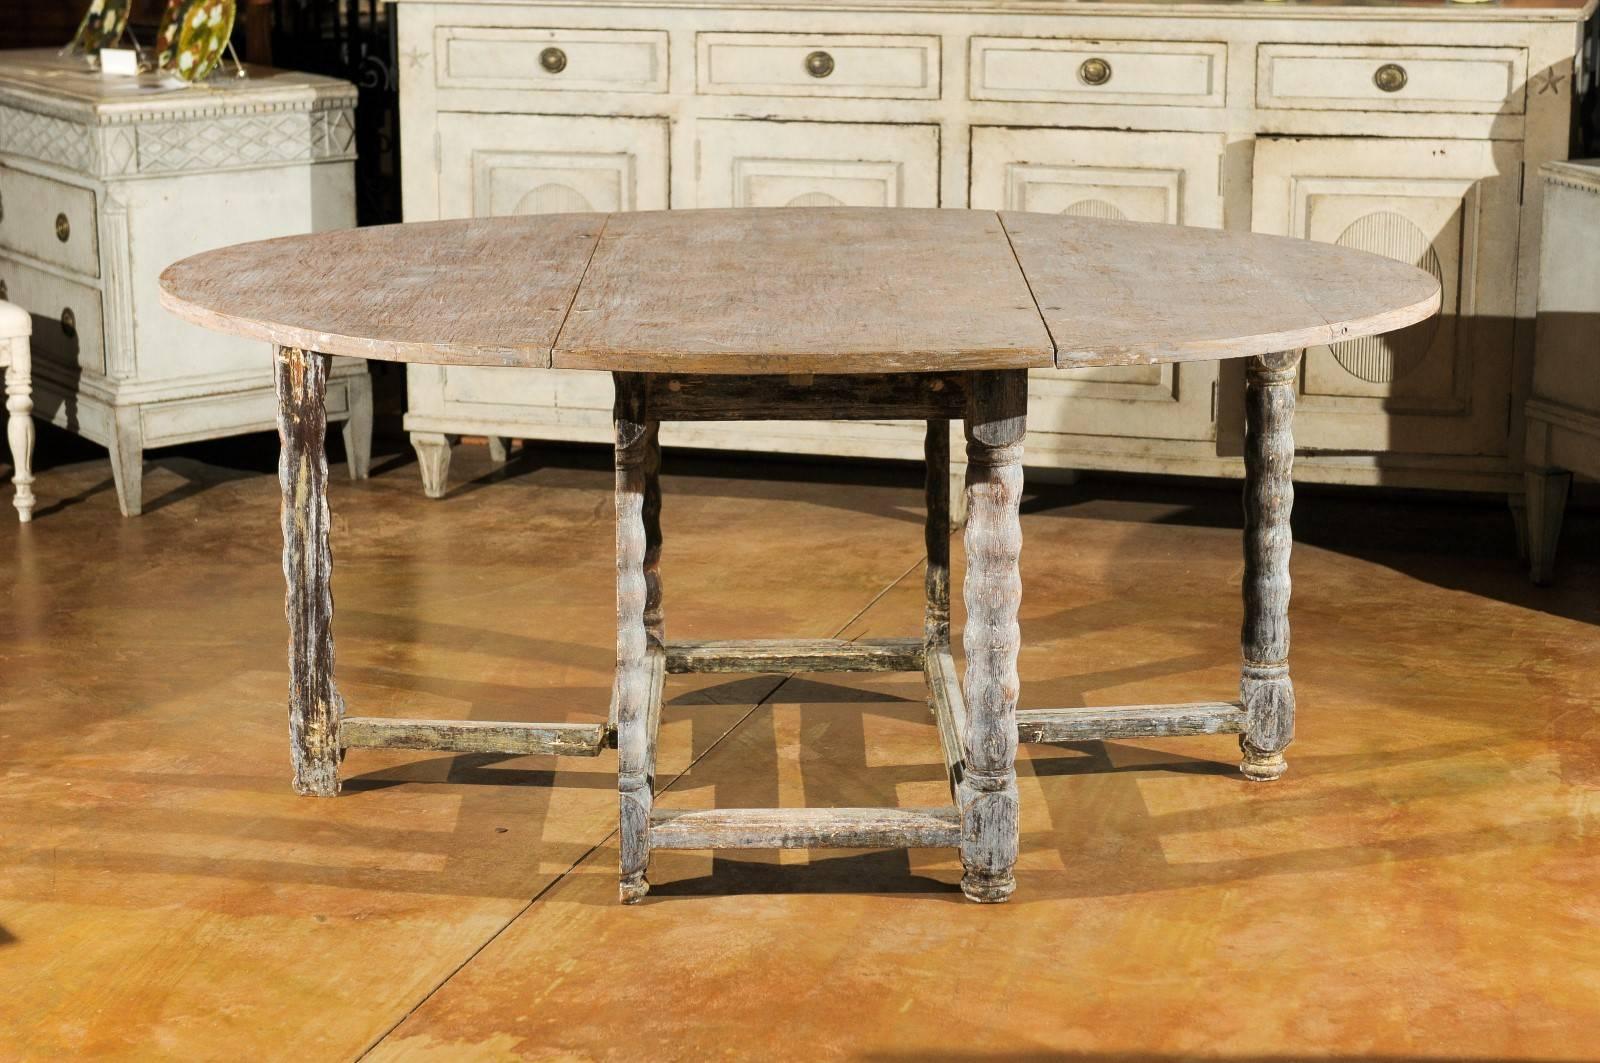 Swedish 18th century gate table with later paint. Measures: Table is 25.75" deep when closed.